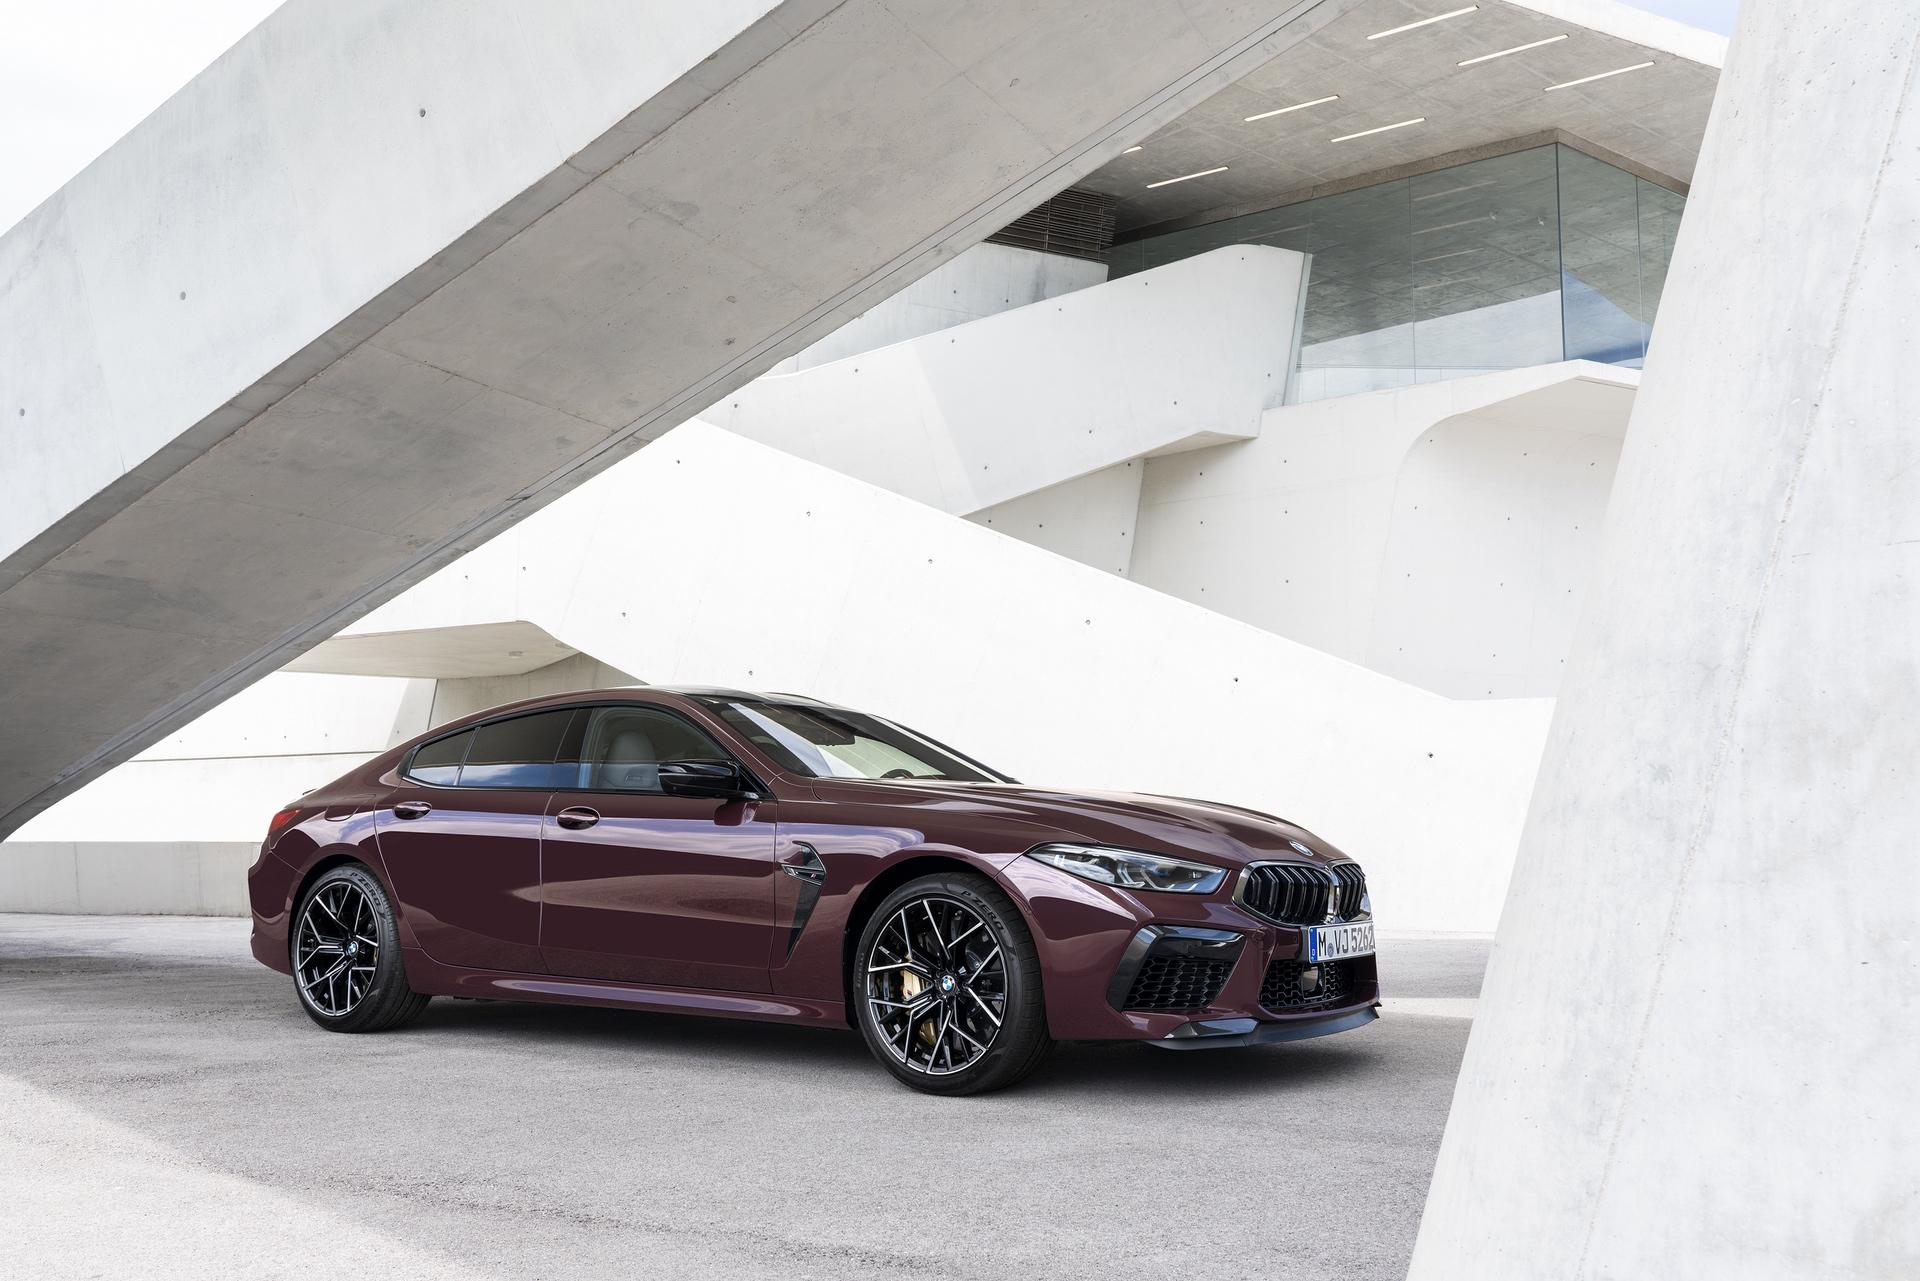 VIDEO: We check out the BMW M8 Gran Coupe in person